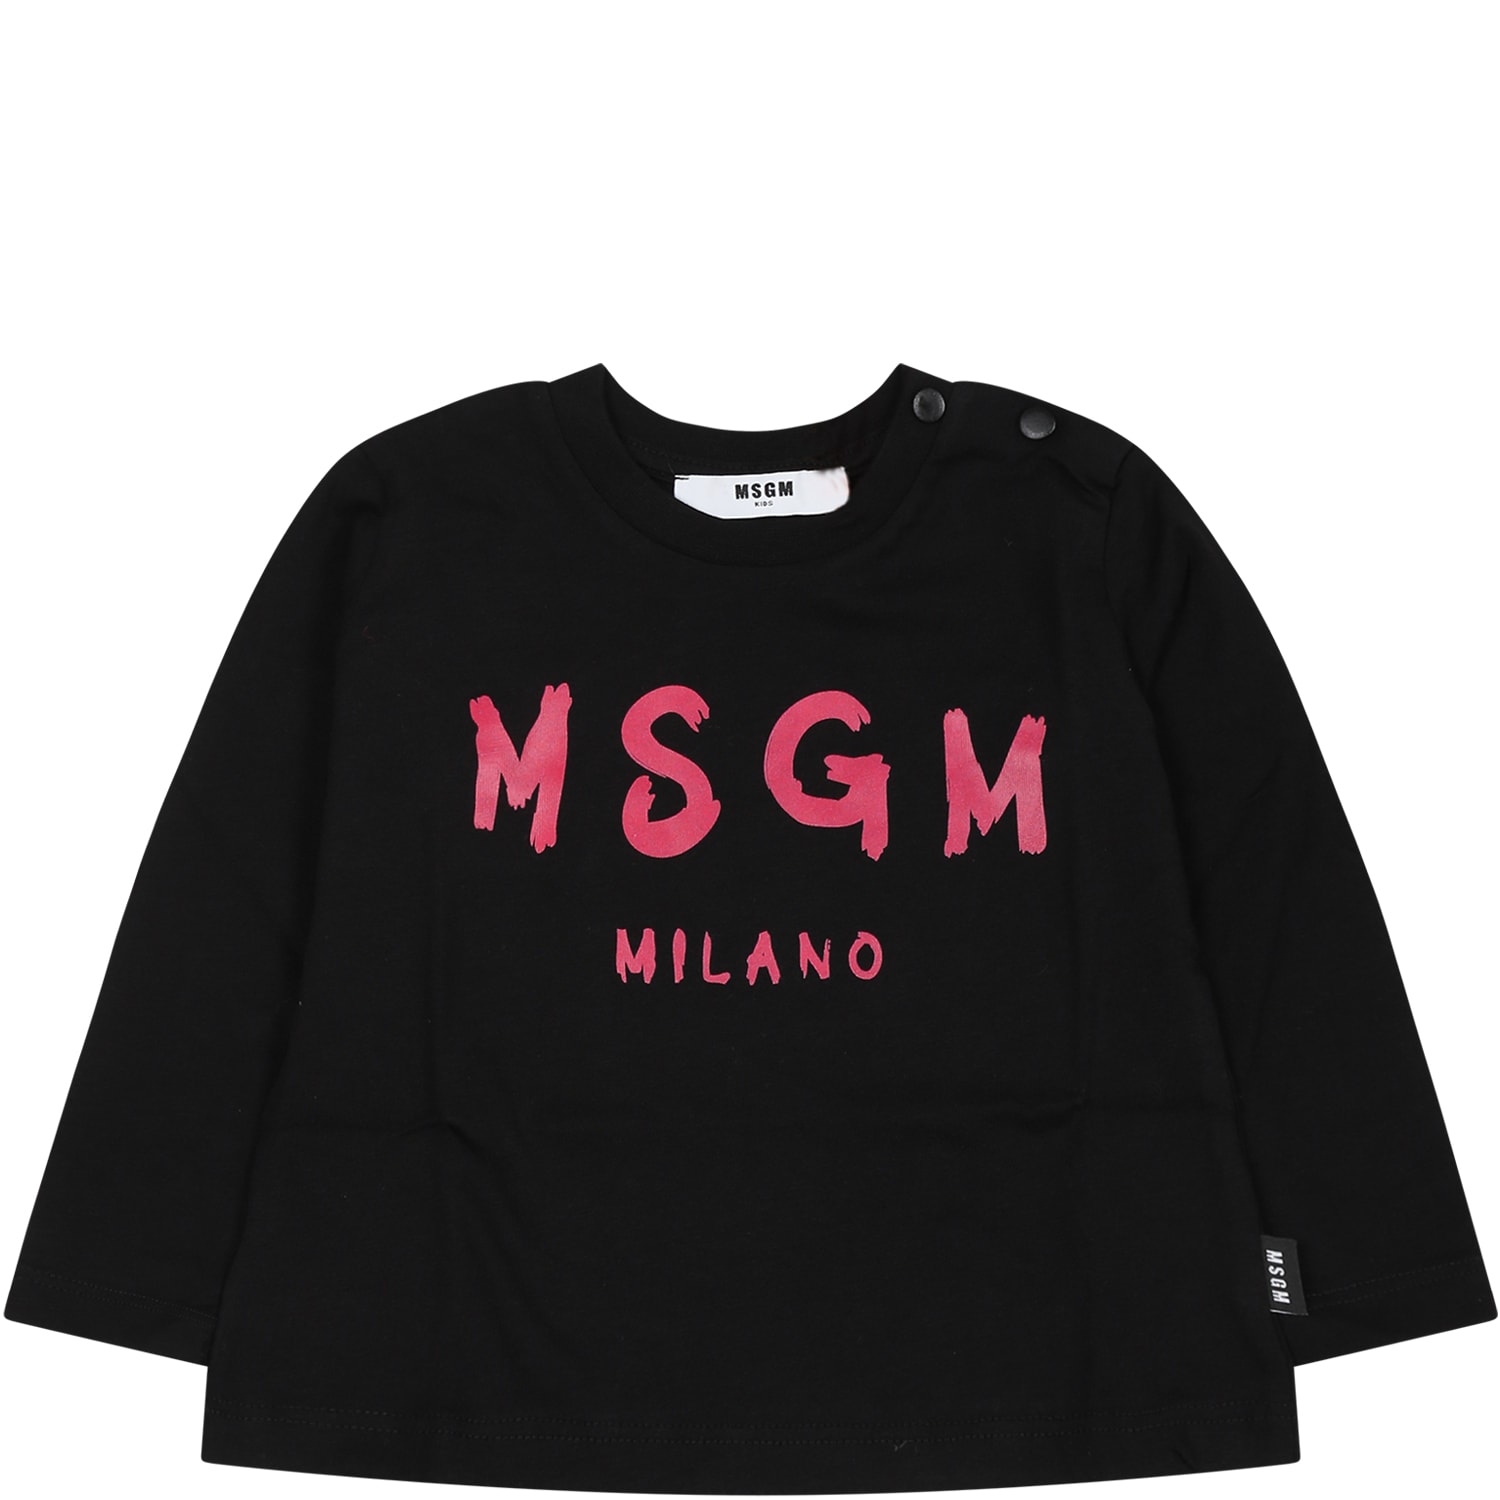 MSGM BLACK T-SHIRT FOR BABY GIRL WITH LOGO